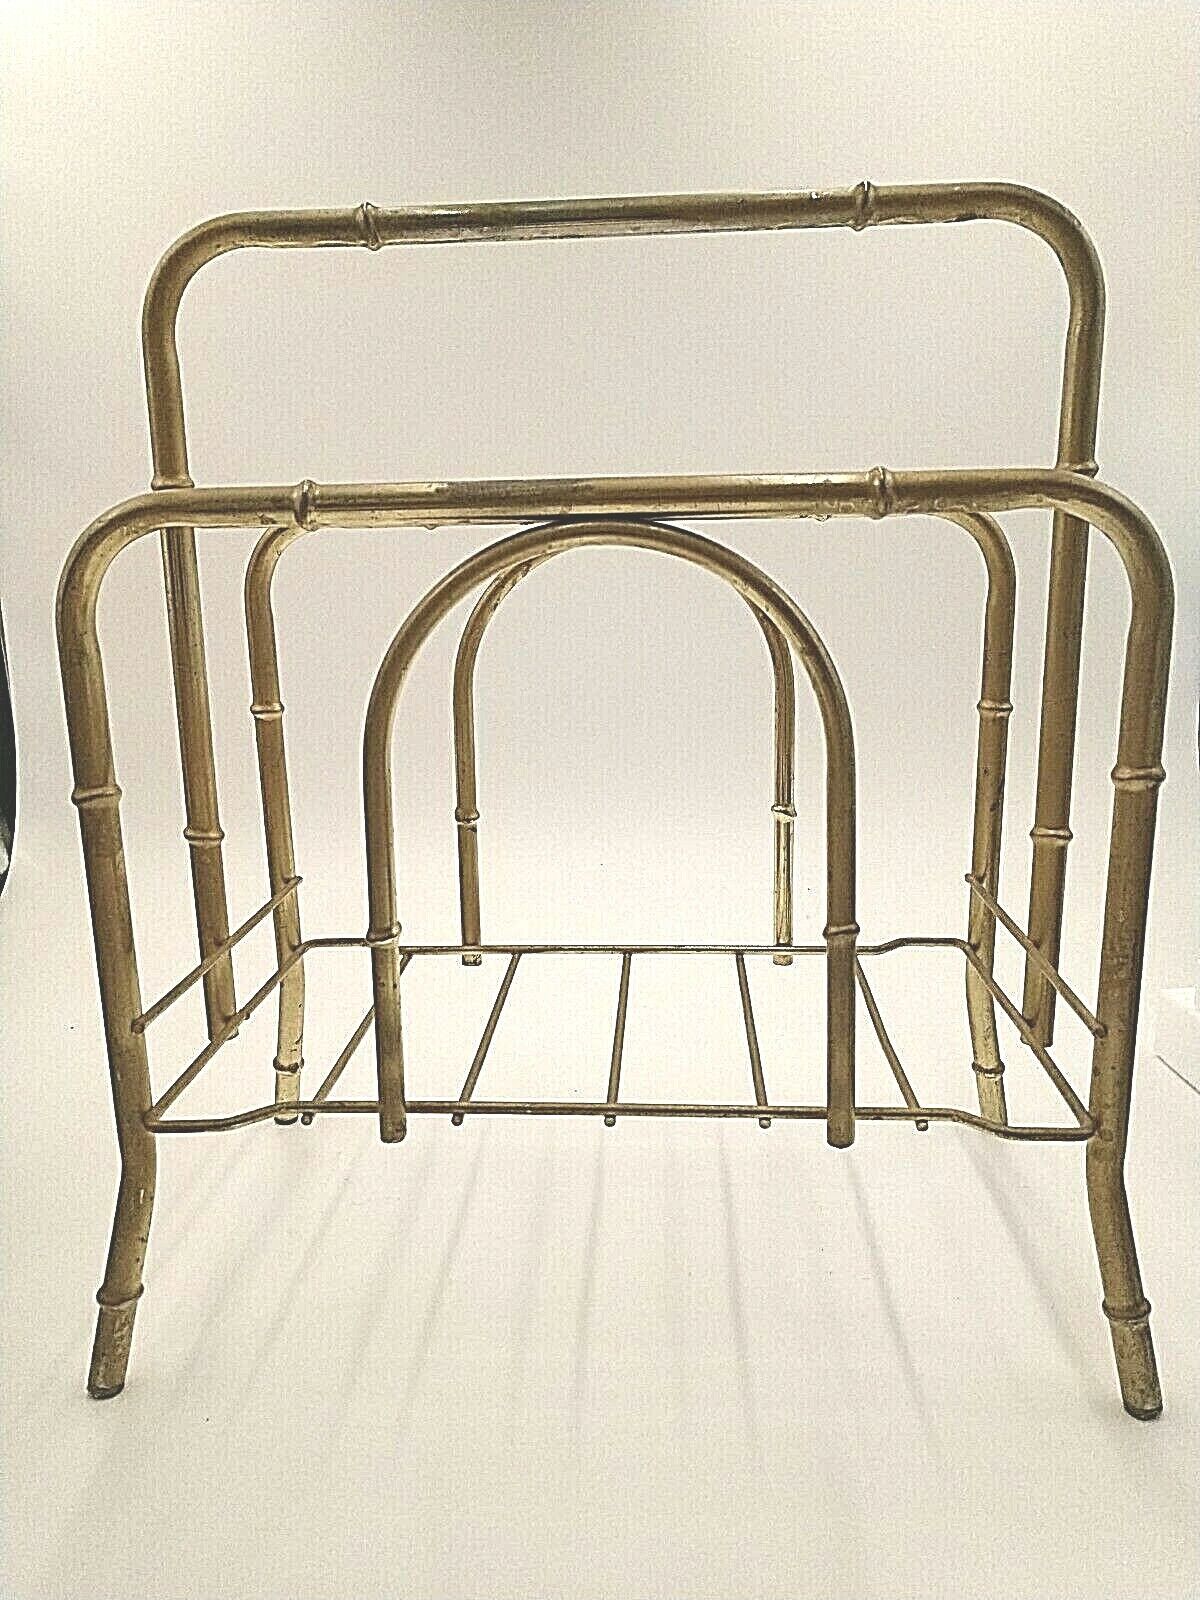 MAGAZINE Rack Stand Metal Bamboo-Style Goldtone Album Vintage MCM Light Weight A